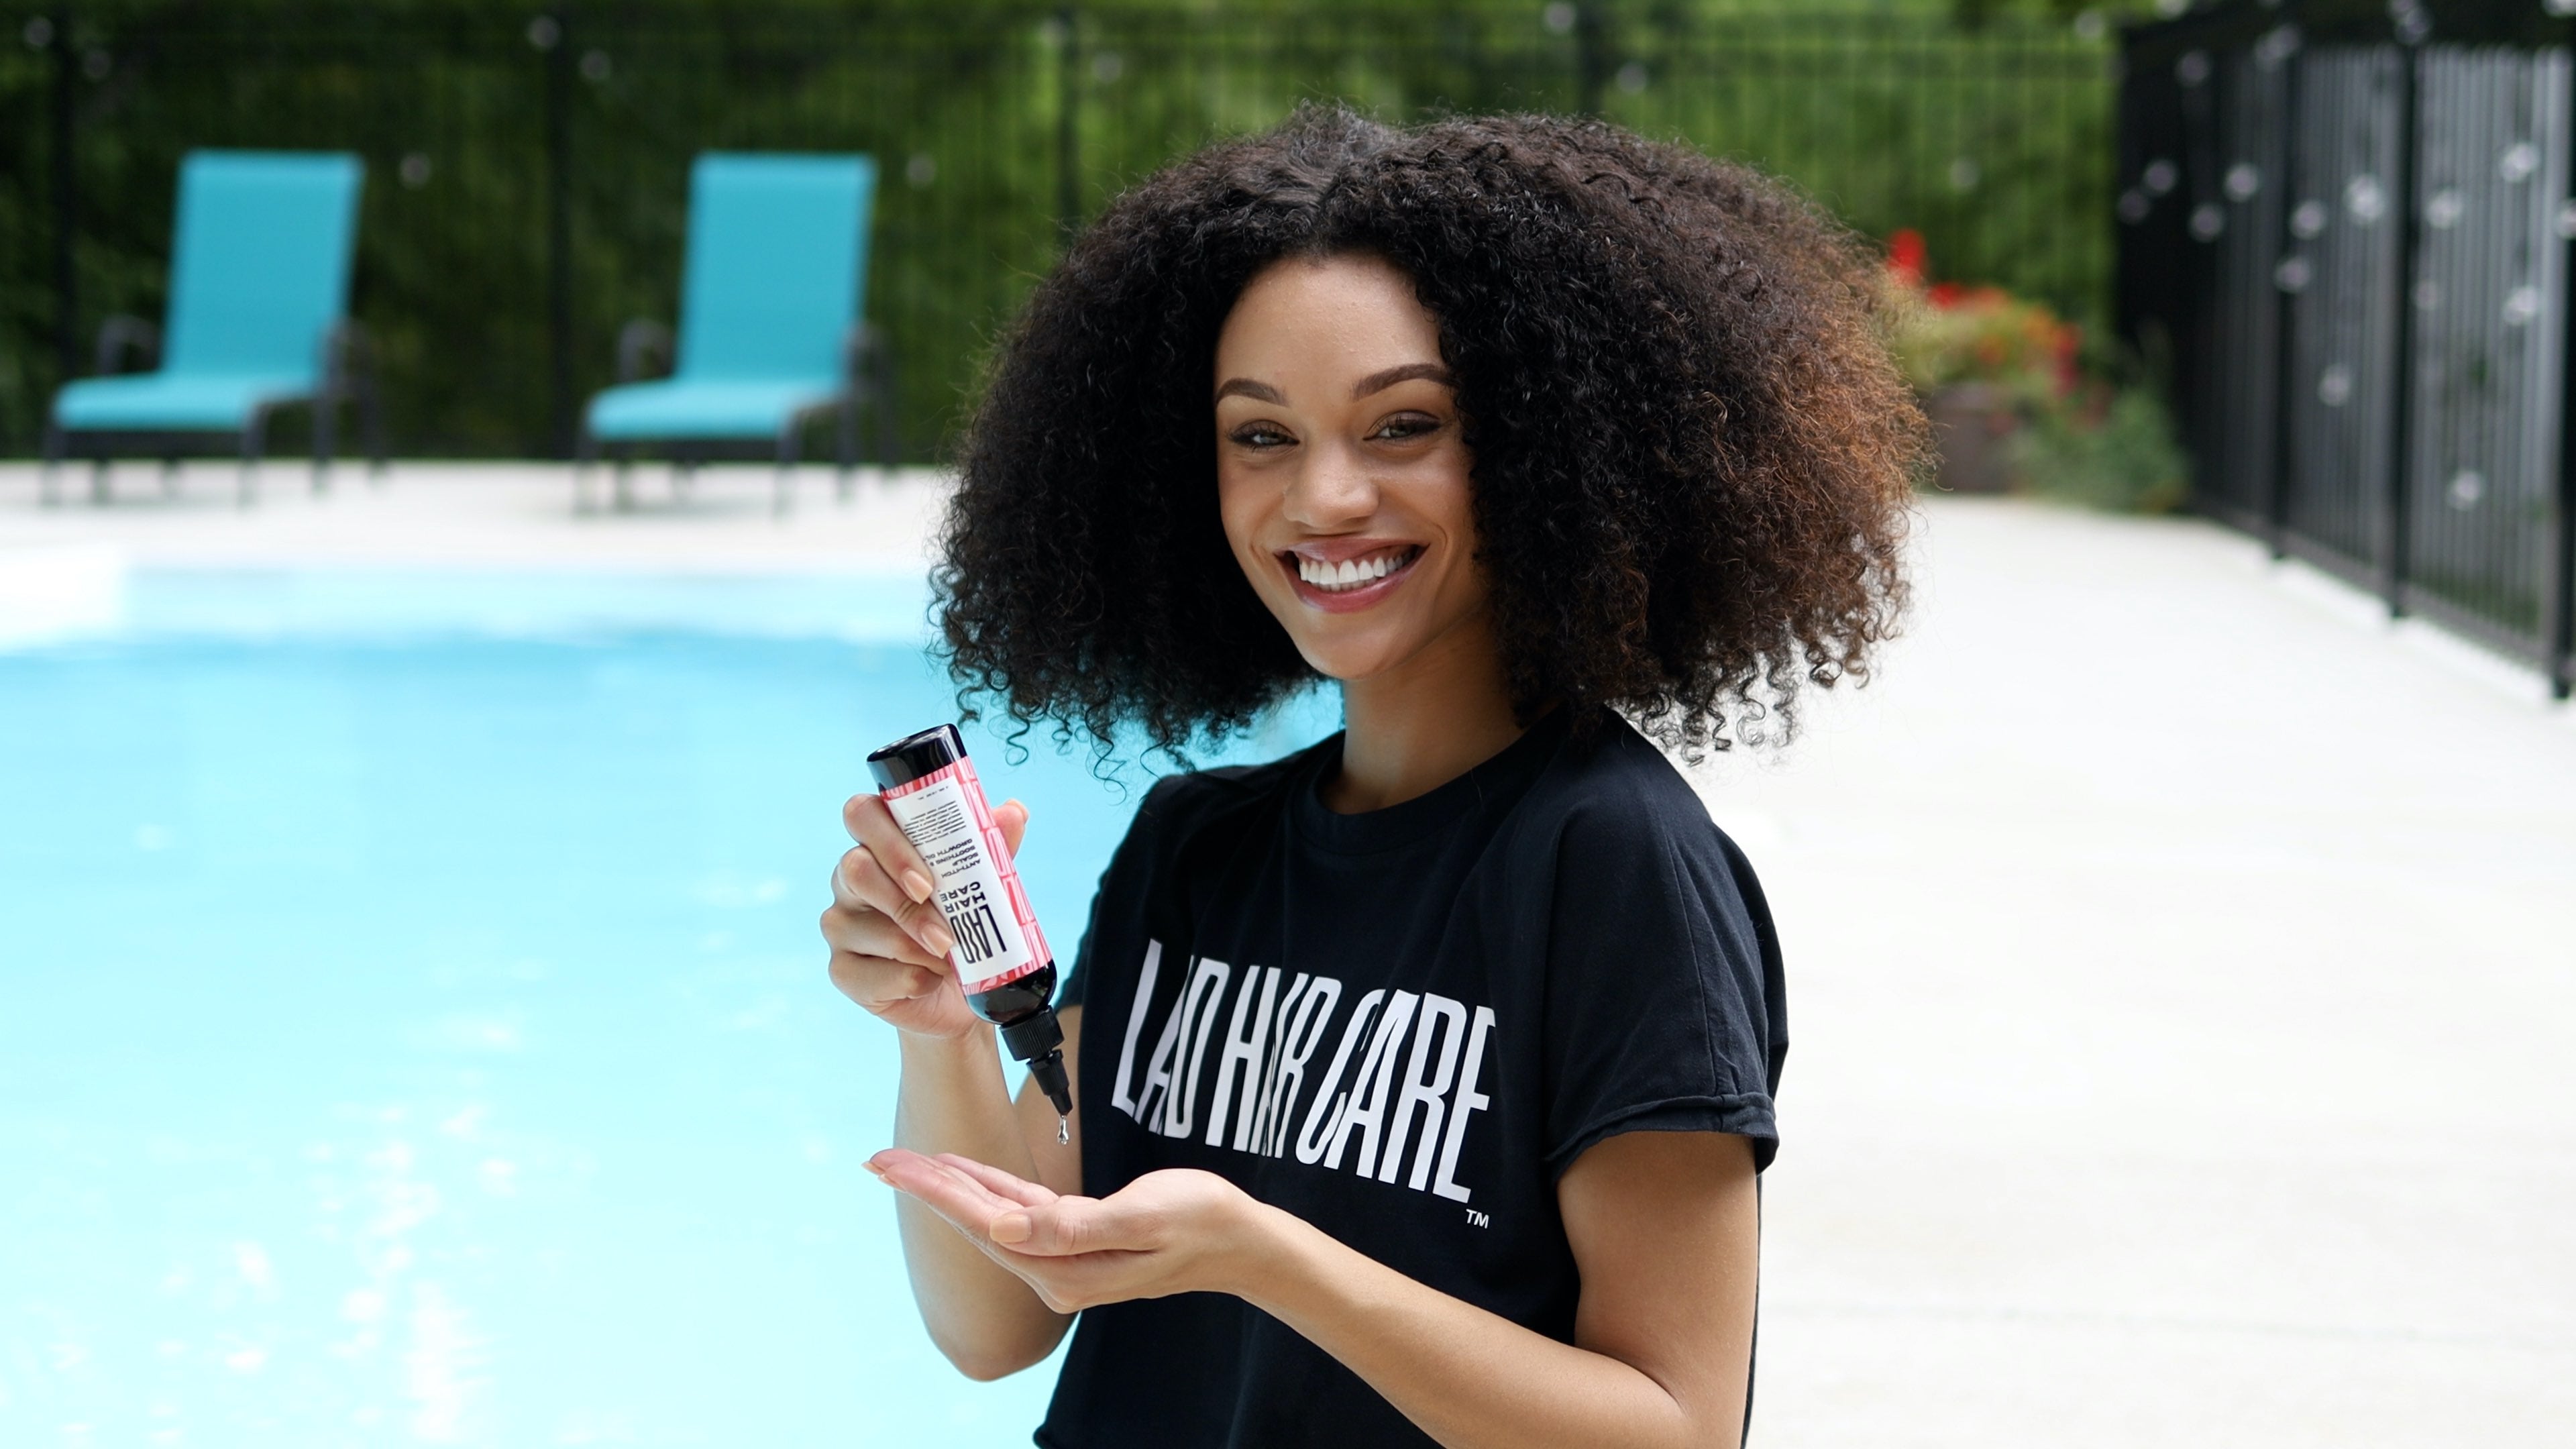 LAID Hair Care - Best Hair Care Products For Curly Hair - Available At Walmart